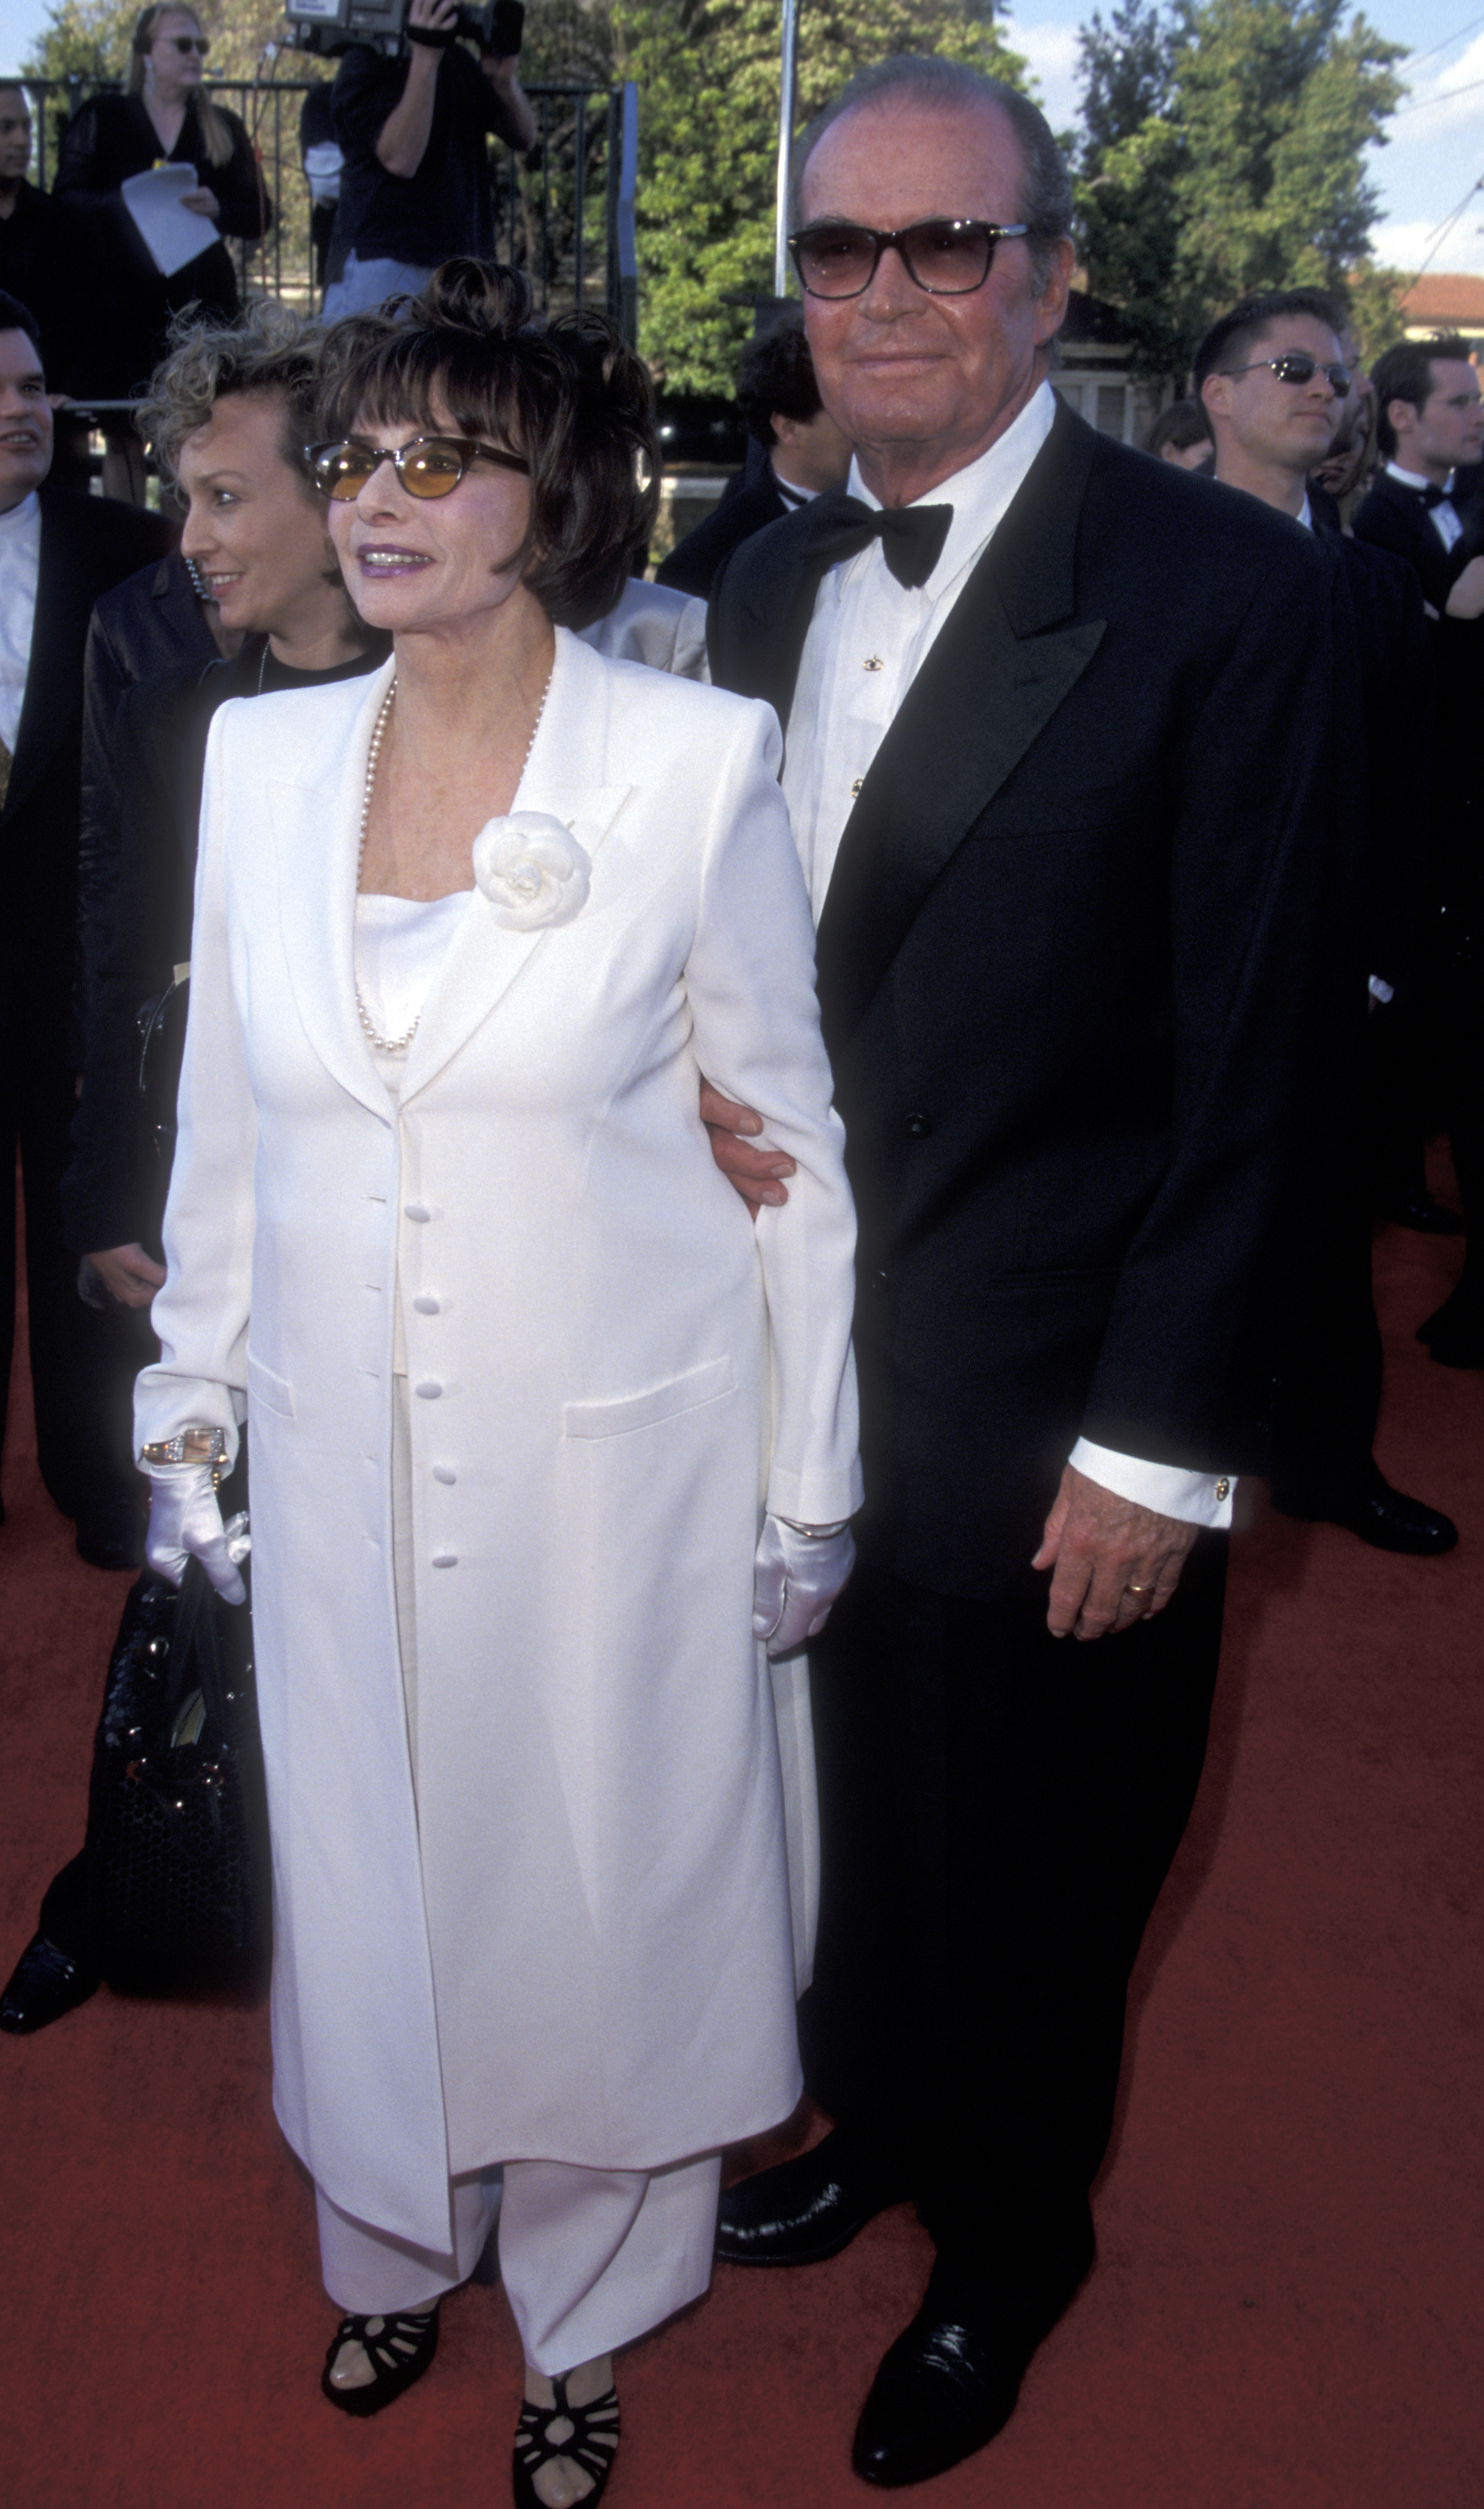 James Garner and wife Lois Garner at the Shrine Auditorium in Los Angeles, California on March 7, 1999 | Source: Getty Images